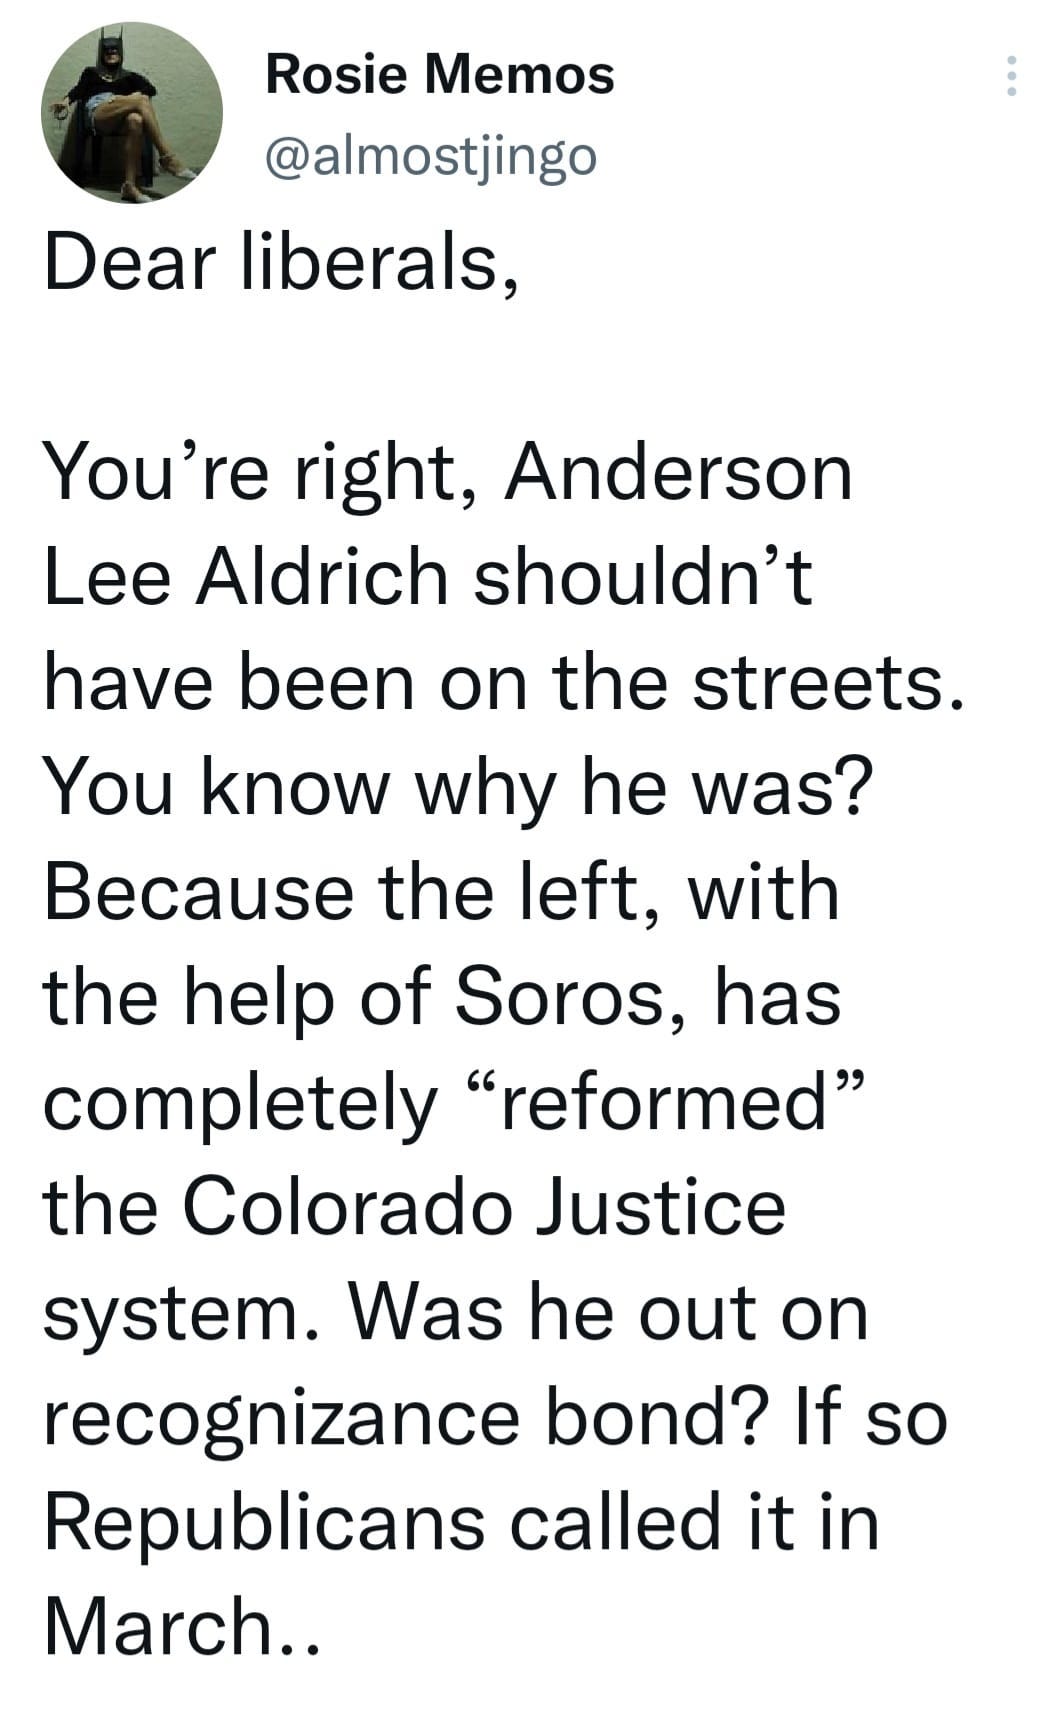 May be an image of text that says 'Rosie Memos @almostjingo Dear liberals, on the You're right, Anderson Lee Aldrich shouldn't have been streets. You know why he was? Because the left, with the help of Soros, has completely "reformed" the Colorado Justice system. Was he out on recognizance bond? If so Republicans called it in March..'